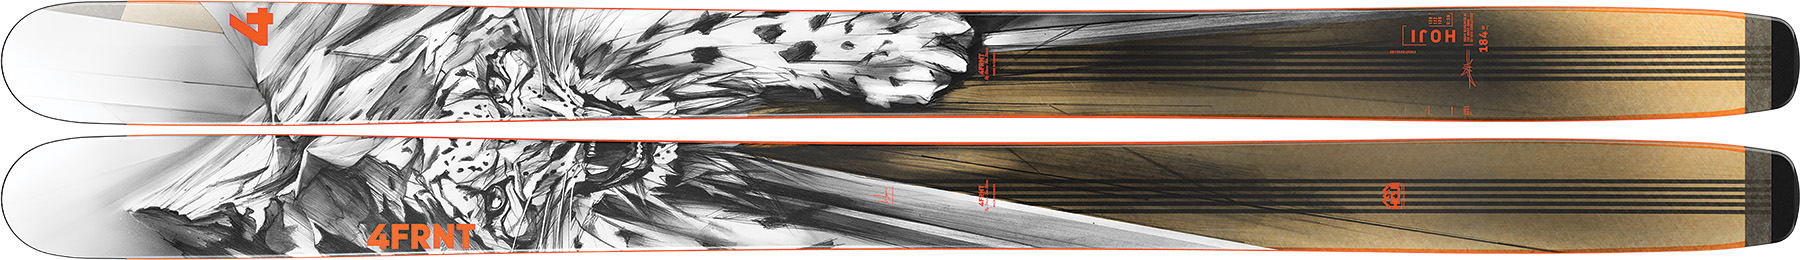 BLISTER 2023-2024 Reviewer Ski Quiver Selections